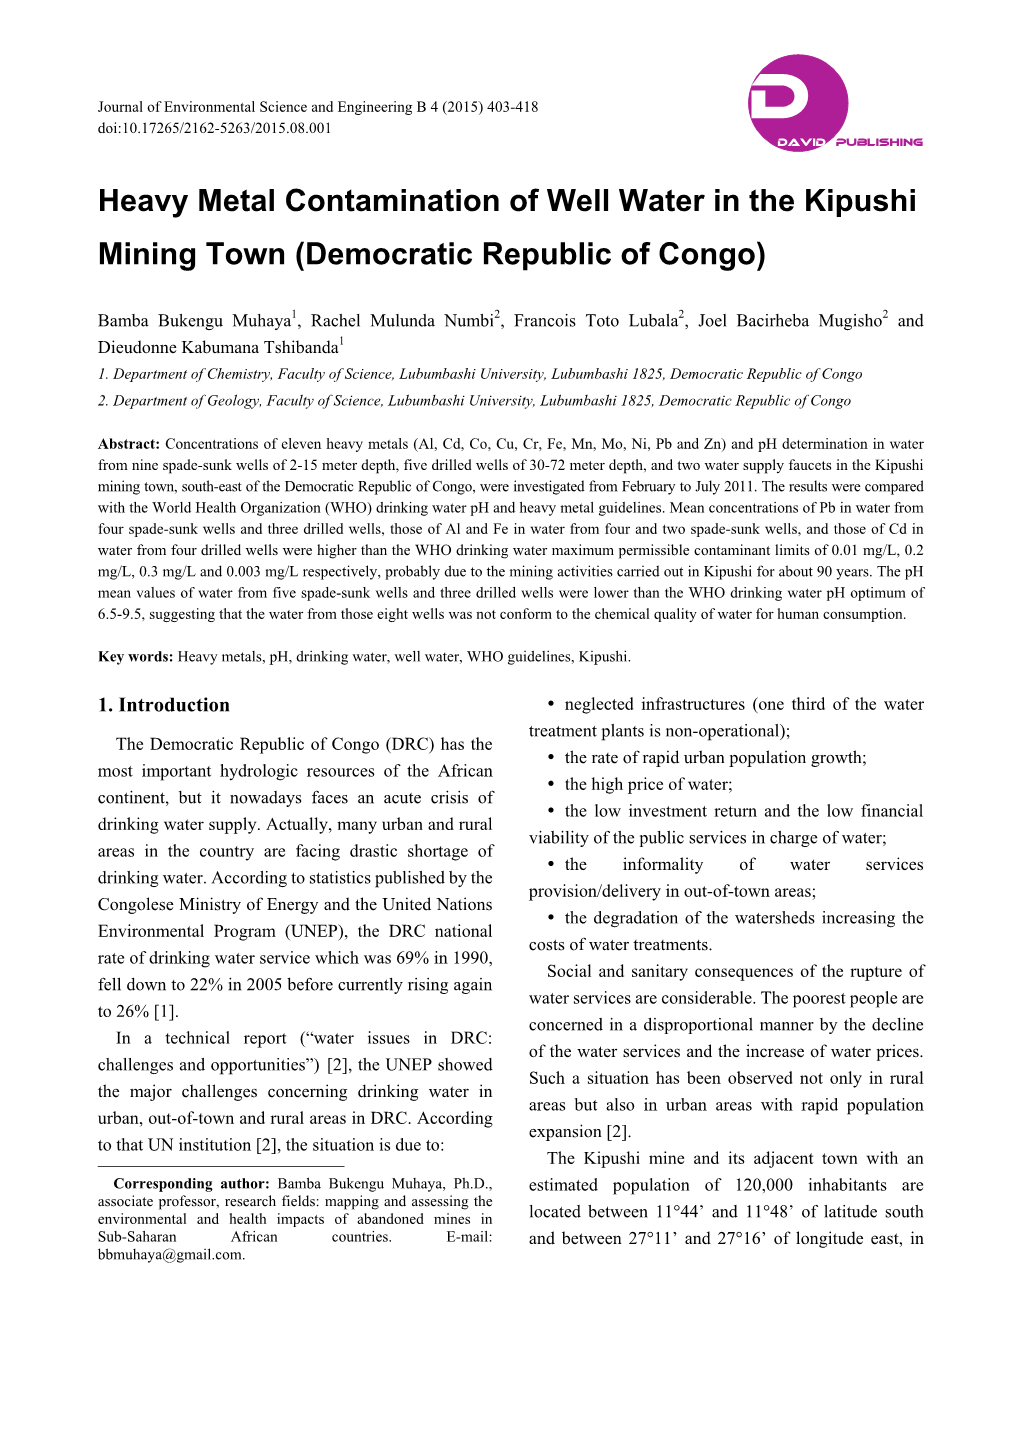 Heavy Metal Contamination of Well Water in the Kipushi Mining Town (Democratic Republic of Congo)